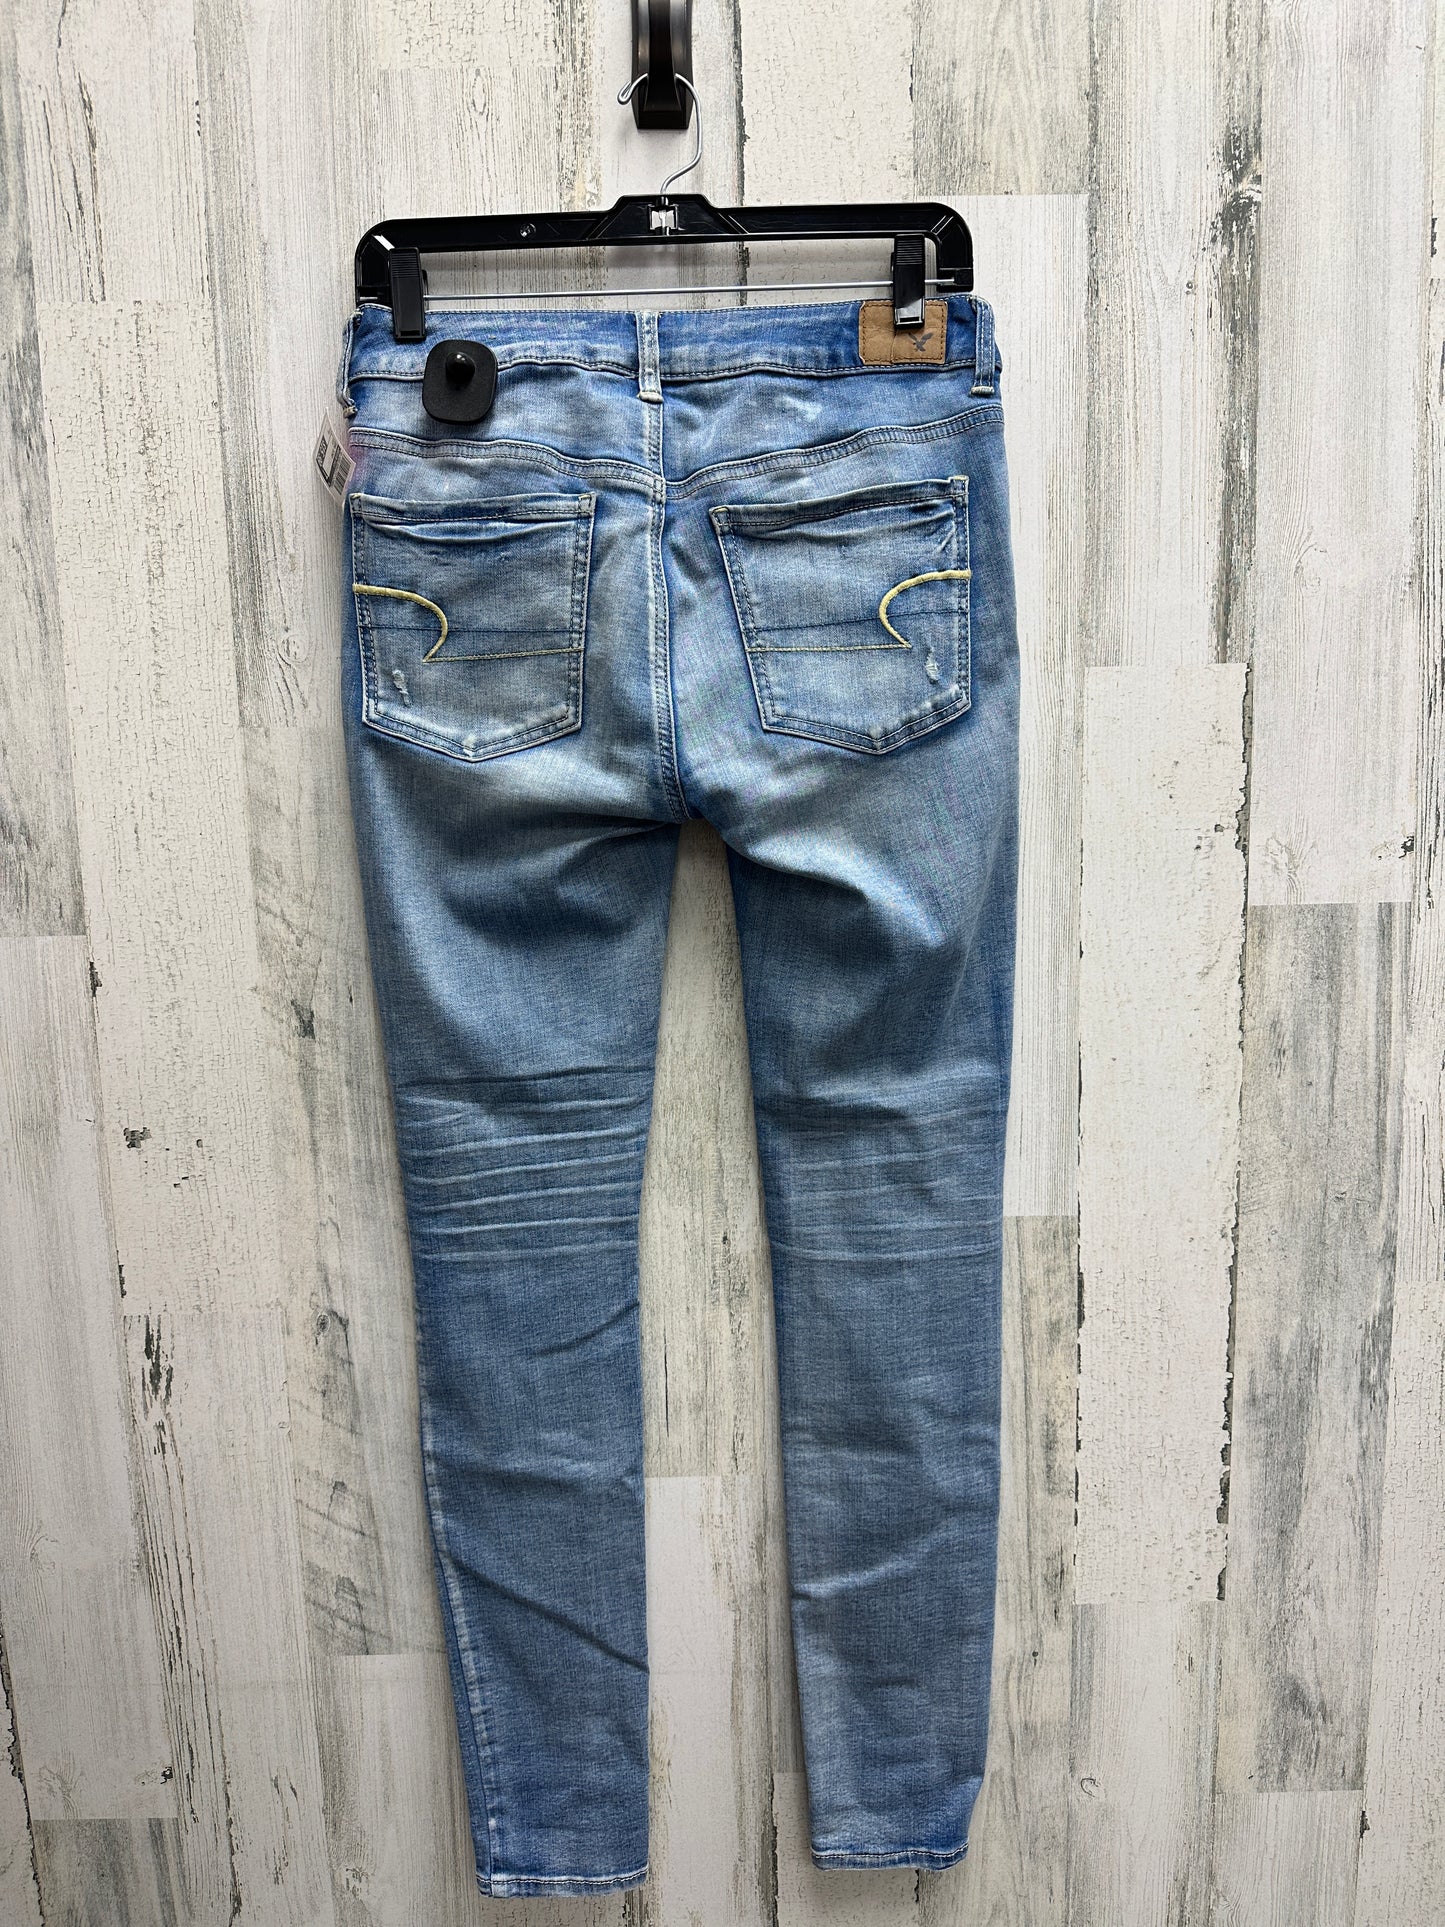 Jeans Skinny By American Eagle  Size: 6